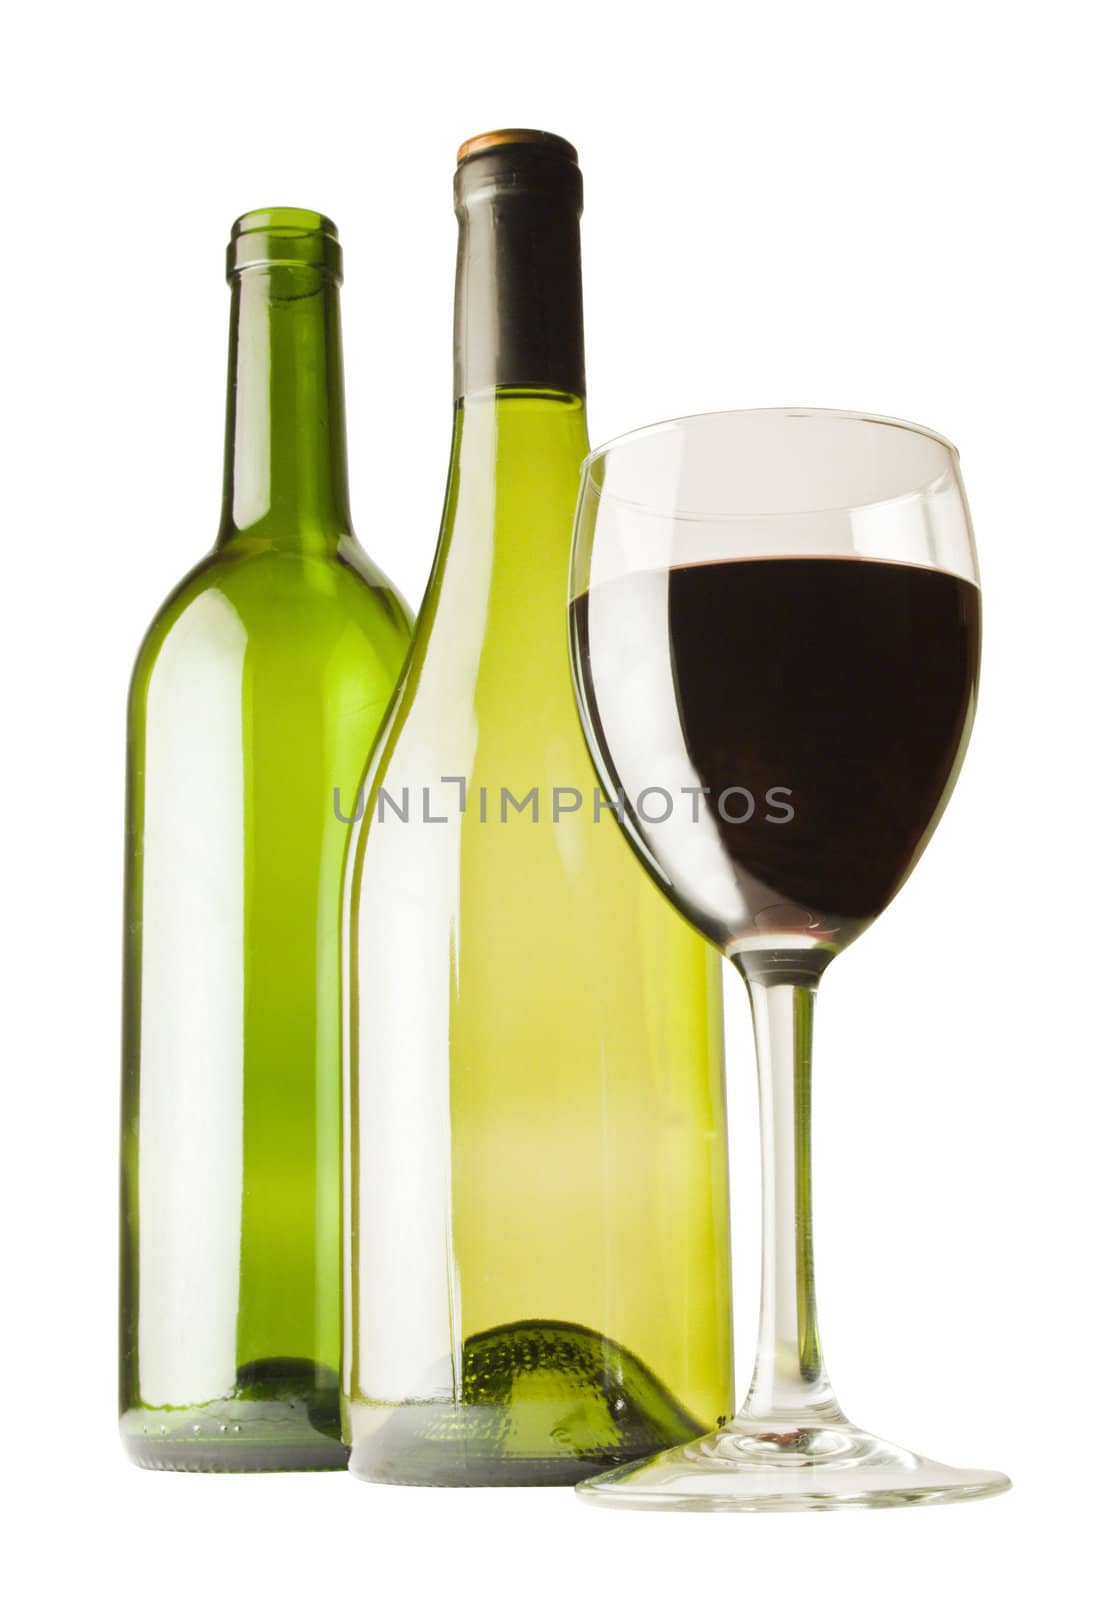 A glass of red wine with two wine bottles